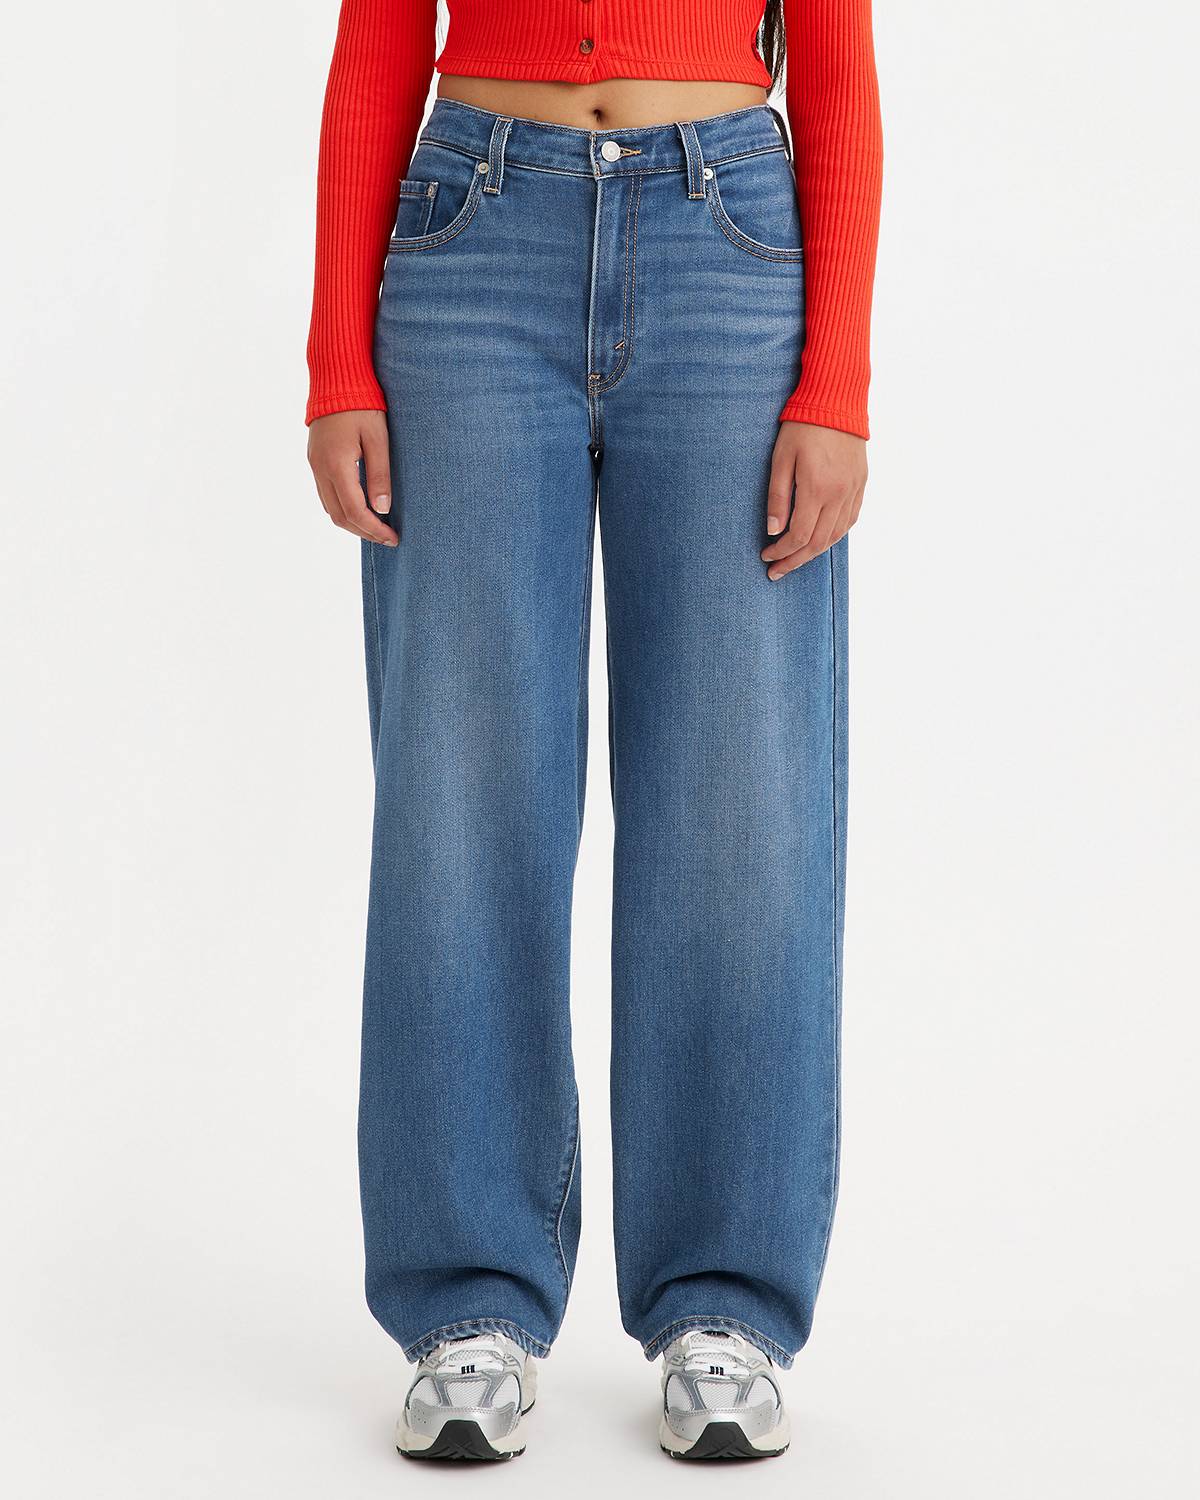 Women's High Waisted Jeans - Shop High Rise Jeans for Women